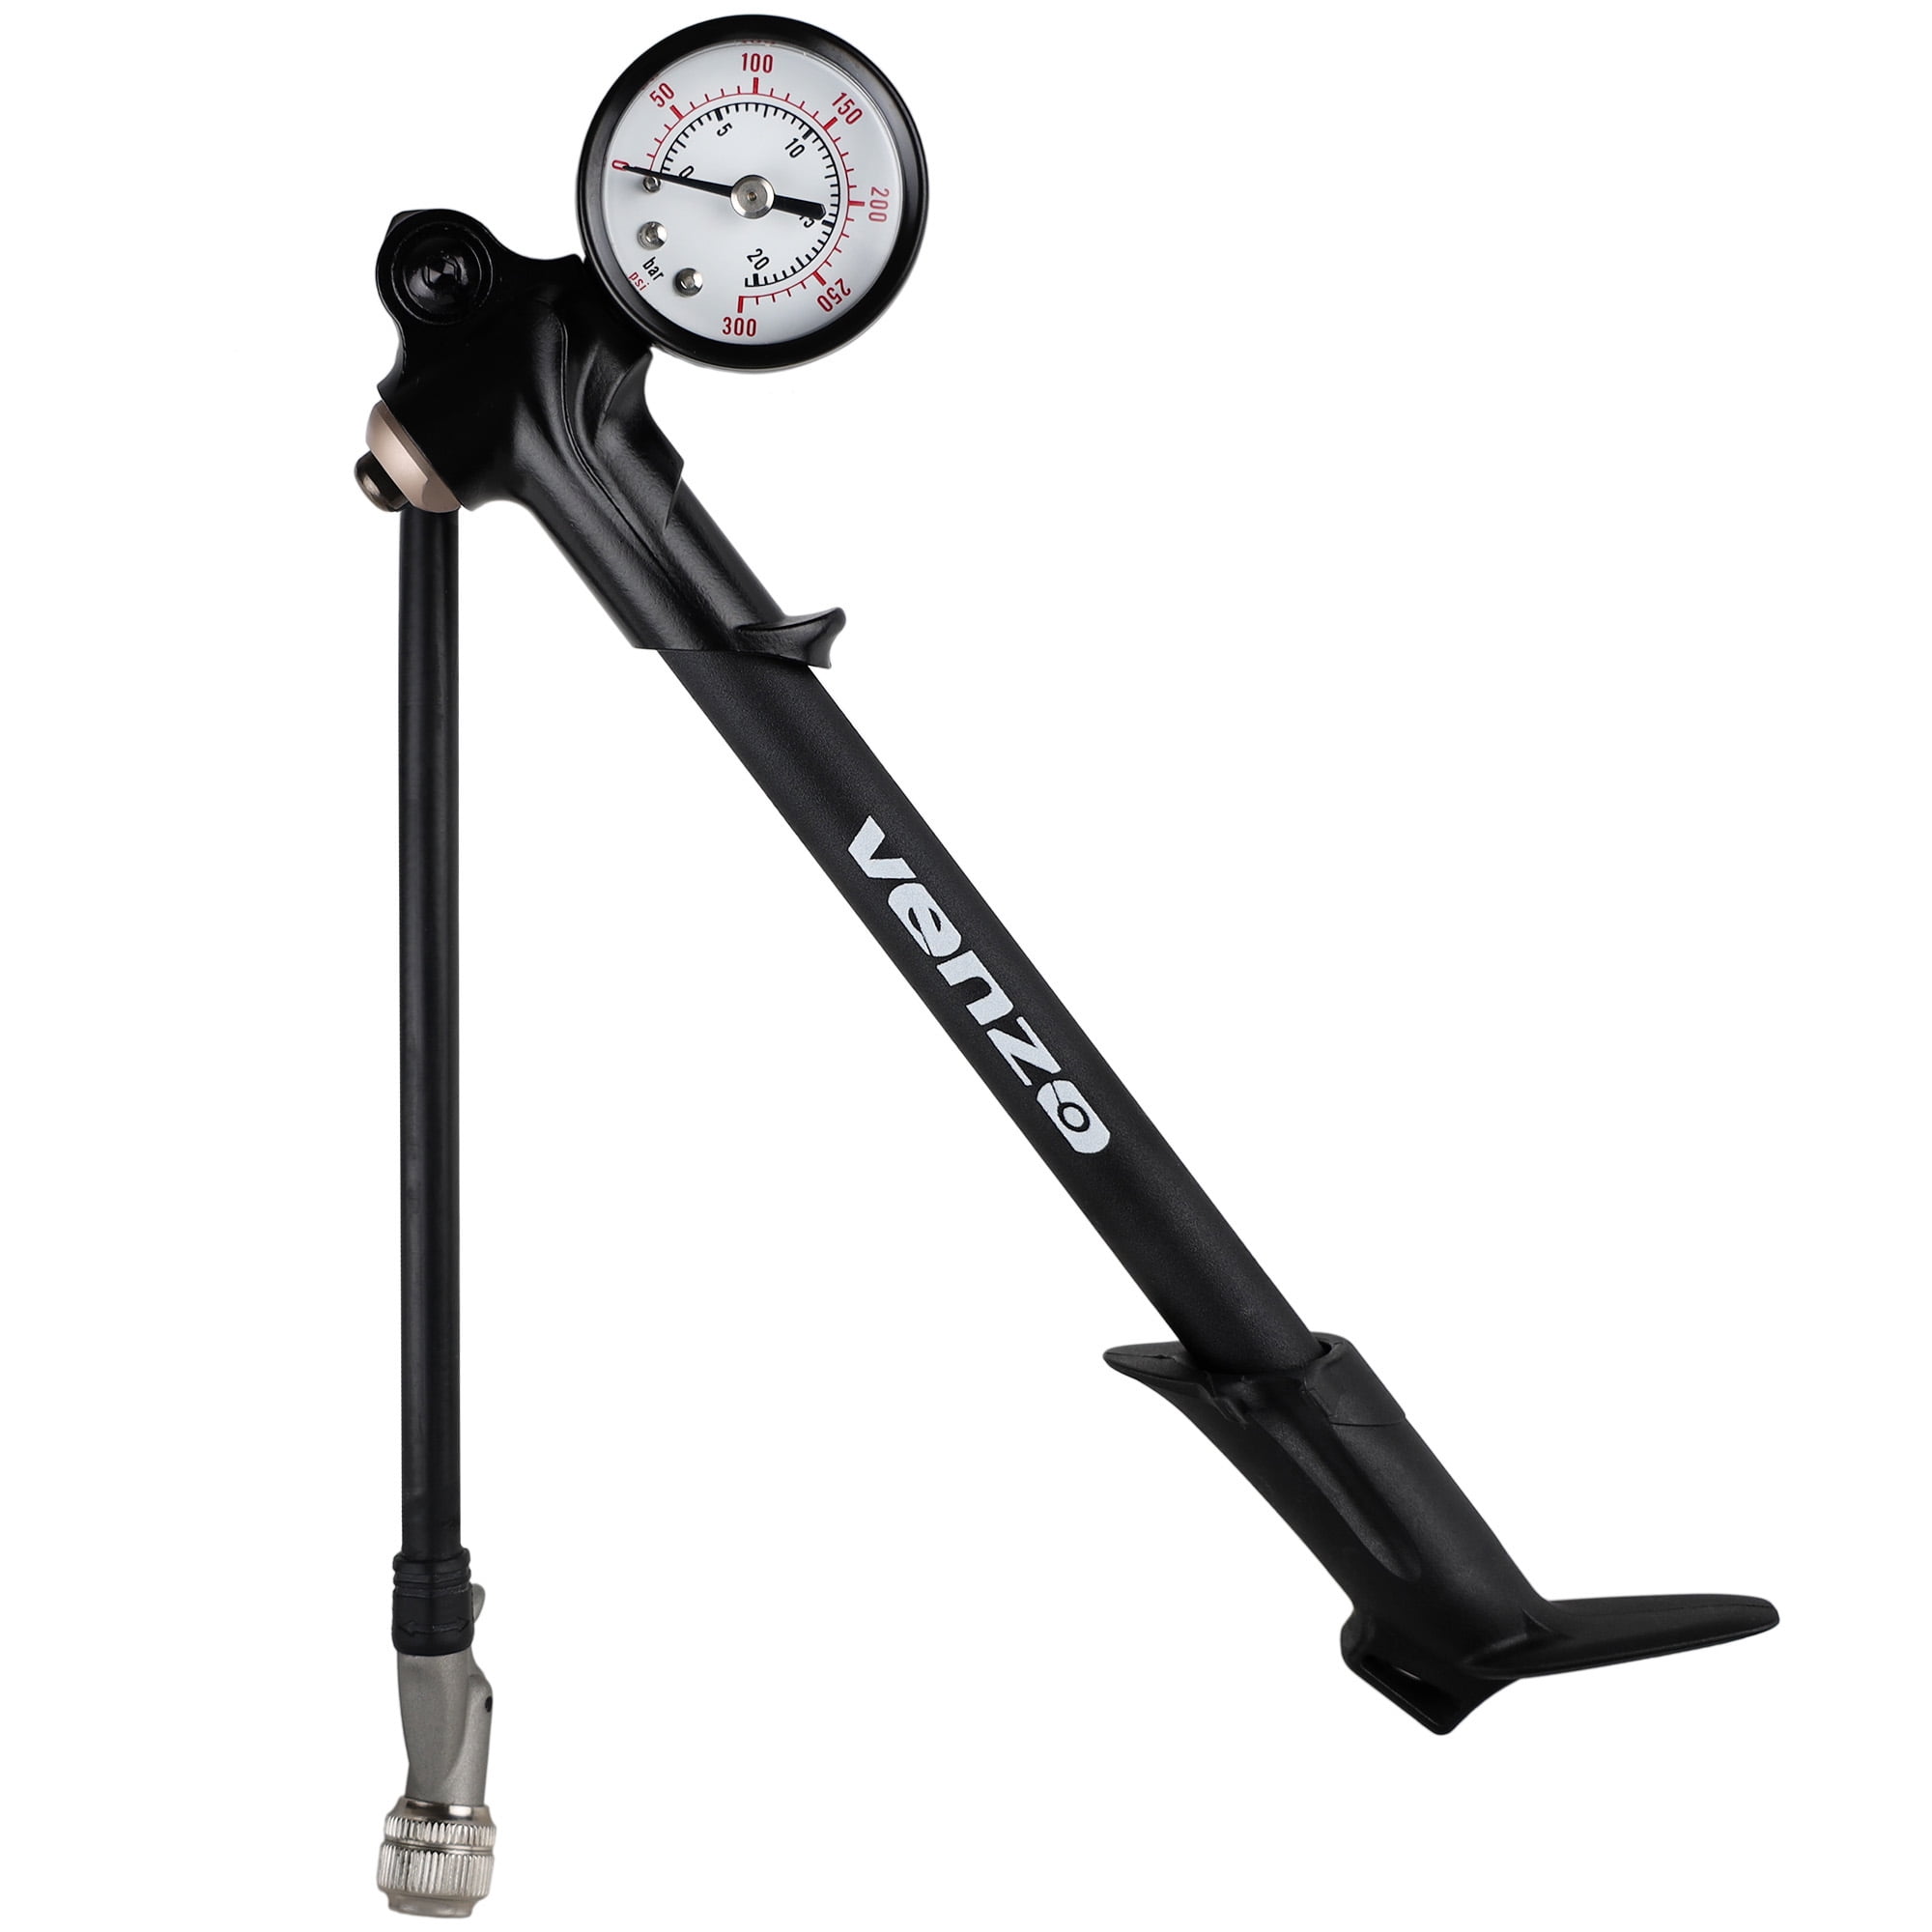 Schrader & Presta Valve Fork & Rear Suspension Gauge Comes with Mount Kit Attachment Accessories Adjustable Max 300PSI High Pressure 2-in-1 Portable Air Shock & Tire Pump Mountain Bike & Bicycle